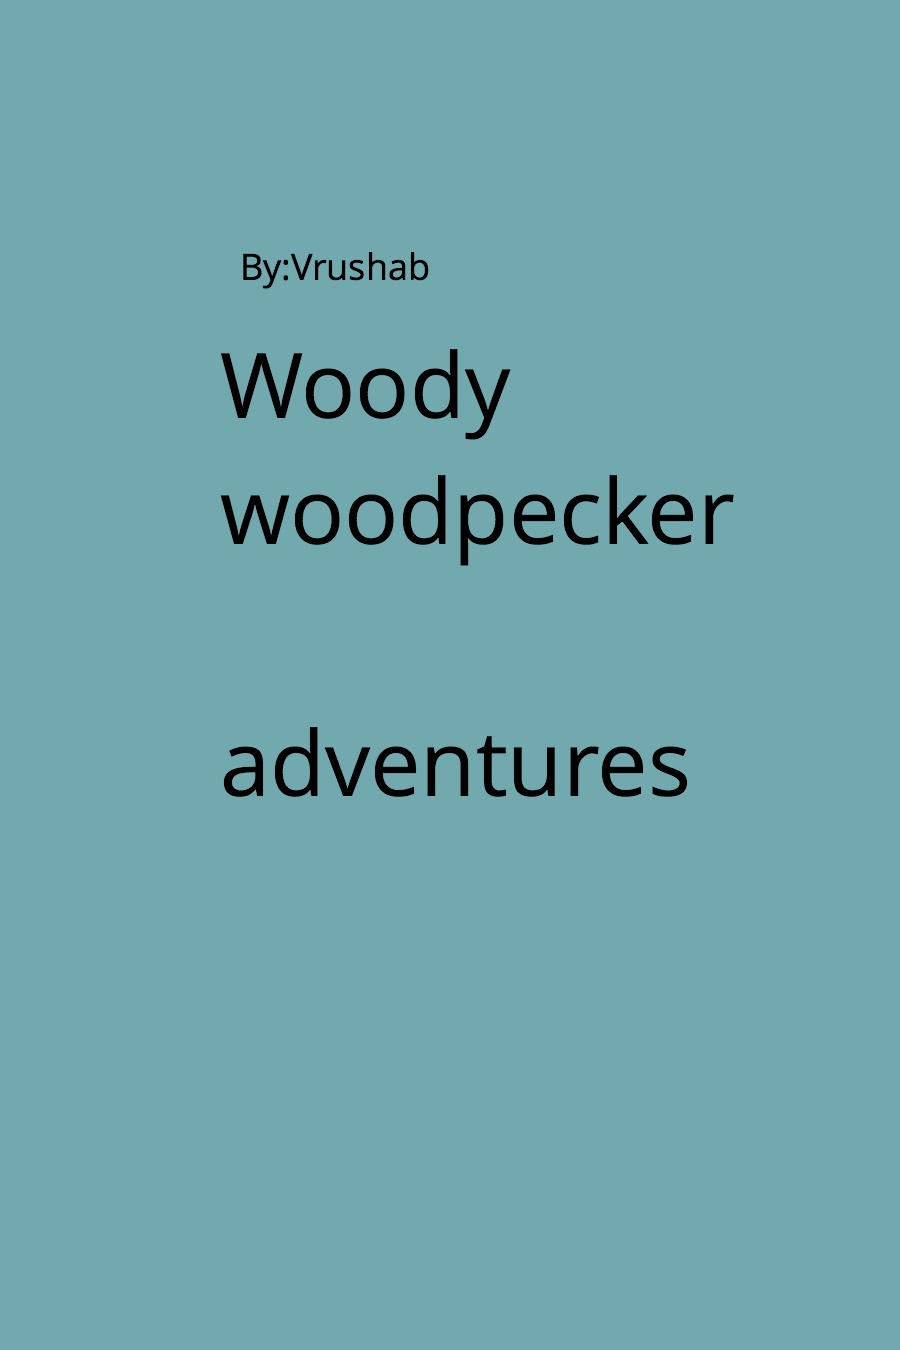 Woody Woodpecker by Vrushab